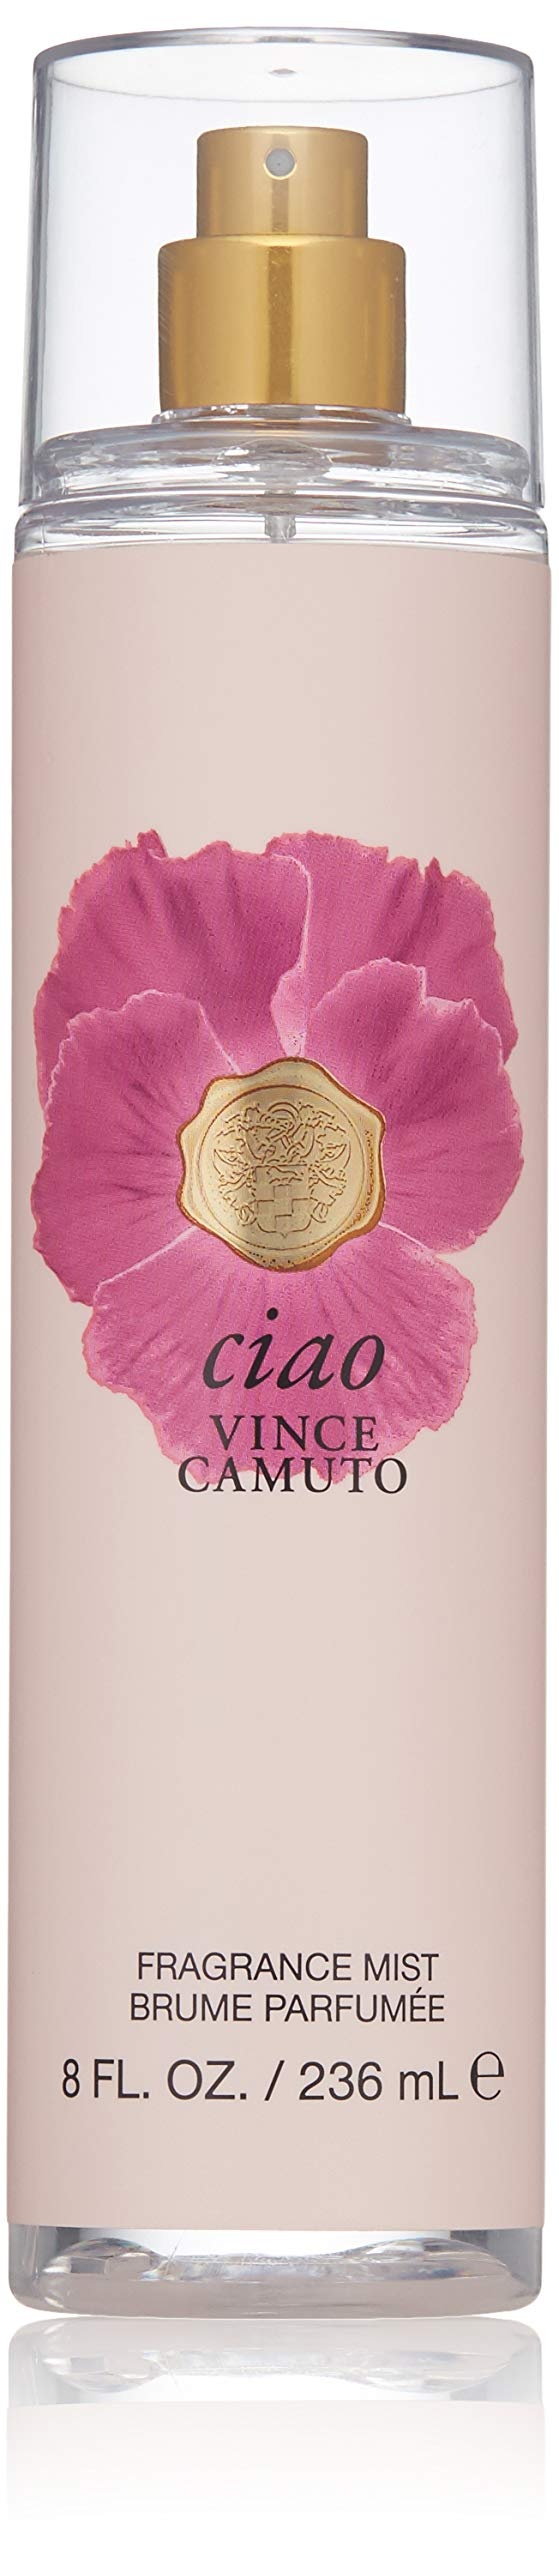 Vince Camuto Ciao Body Mist 240 ml For Women